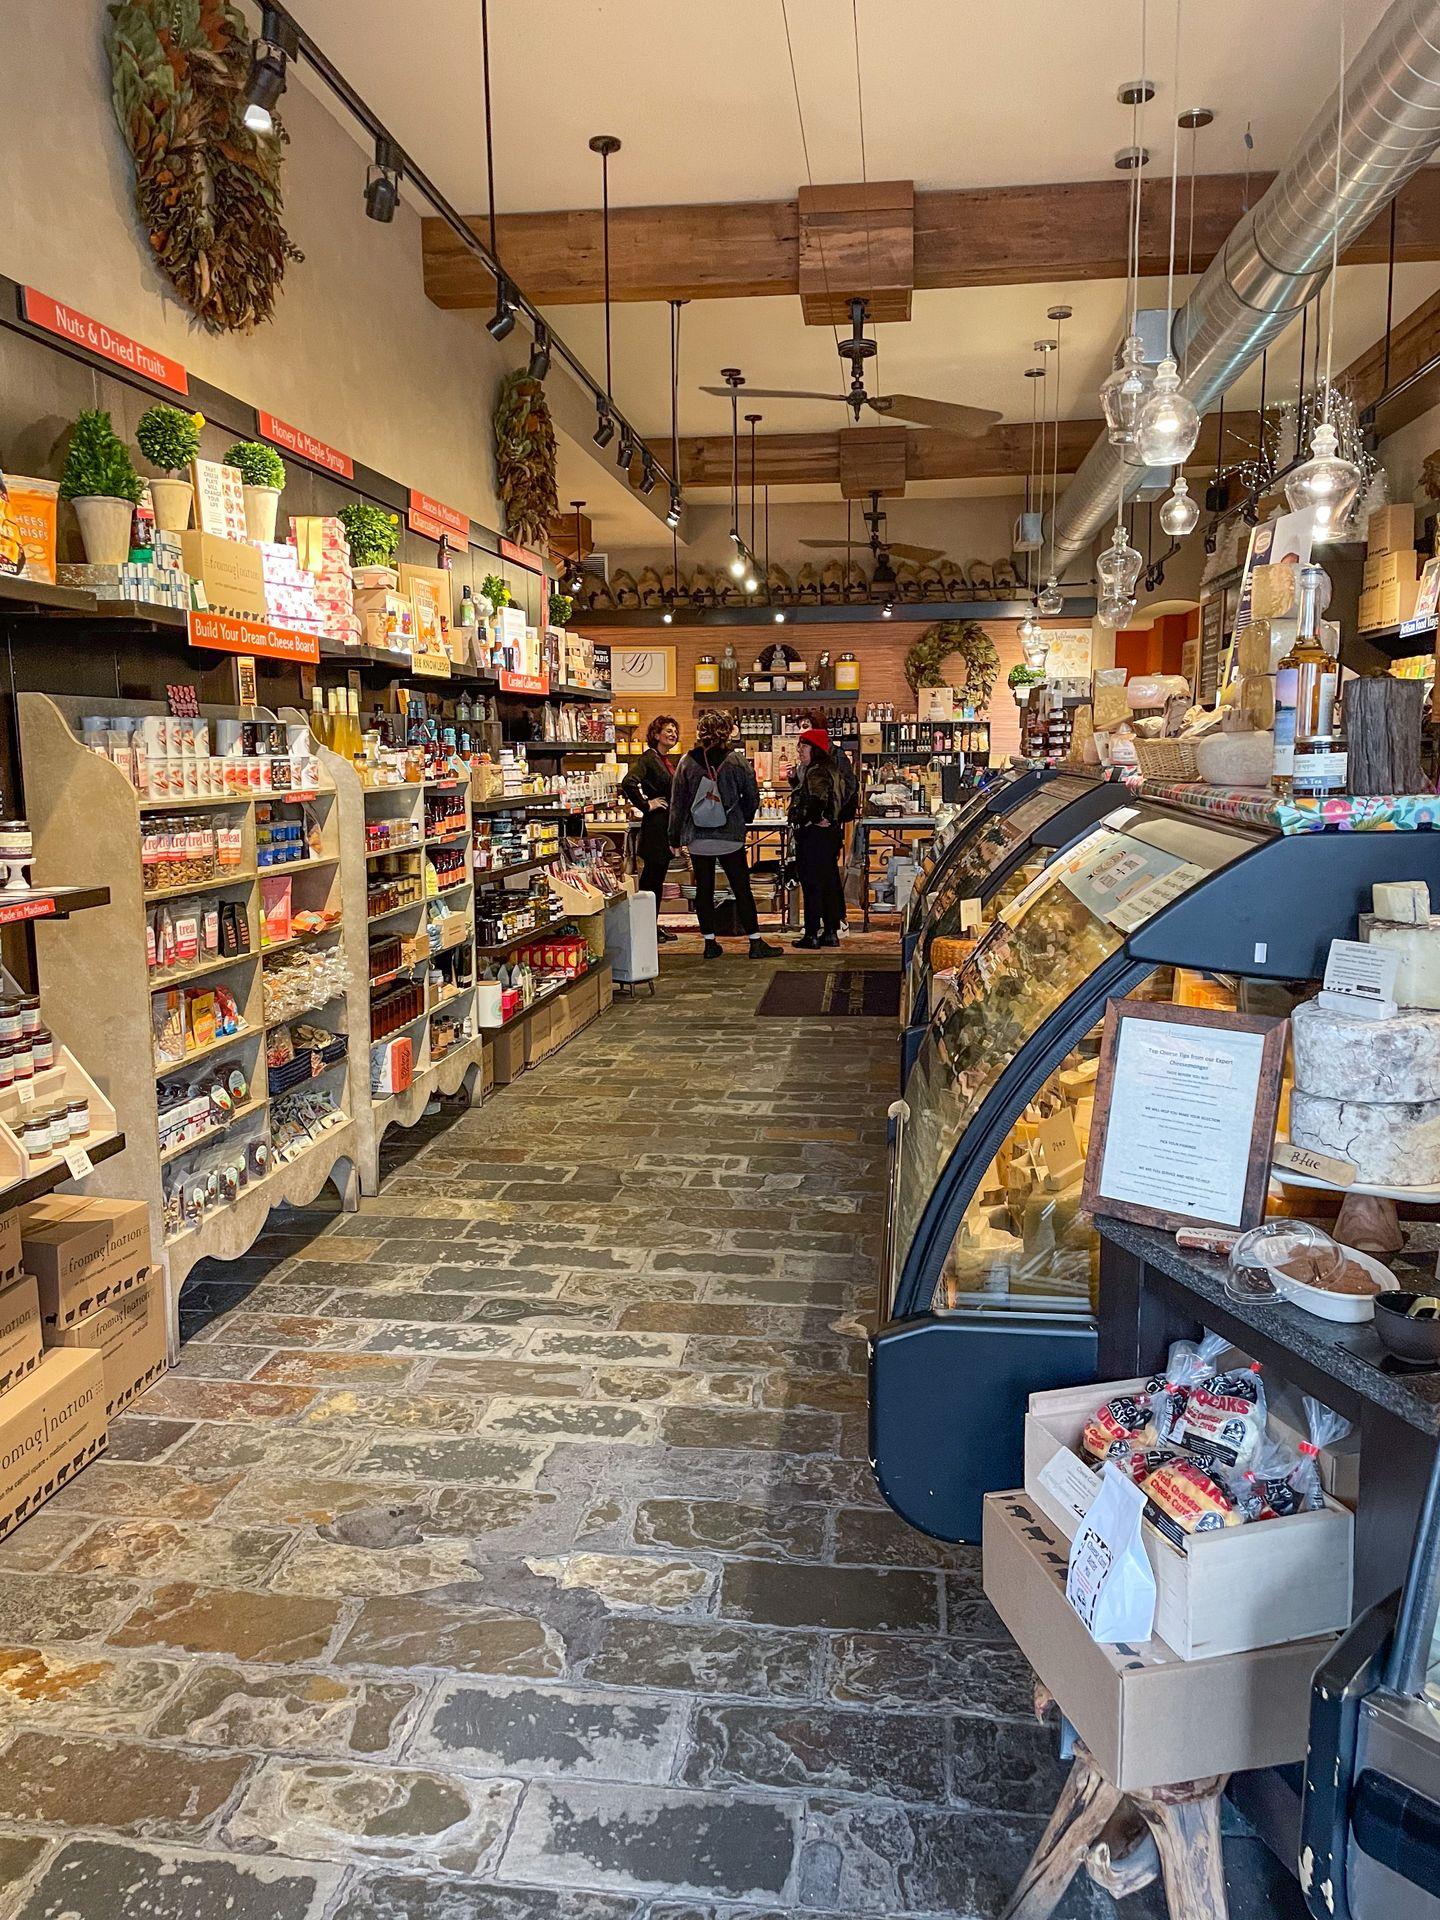 The interior of Fromagination. The store has cold cases of cheeses and shelves full of crackers, jams and other charcuterie items.